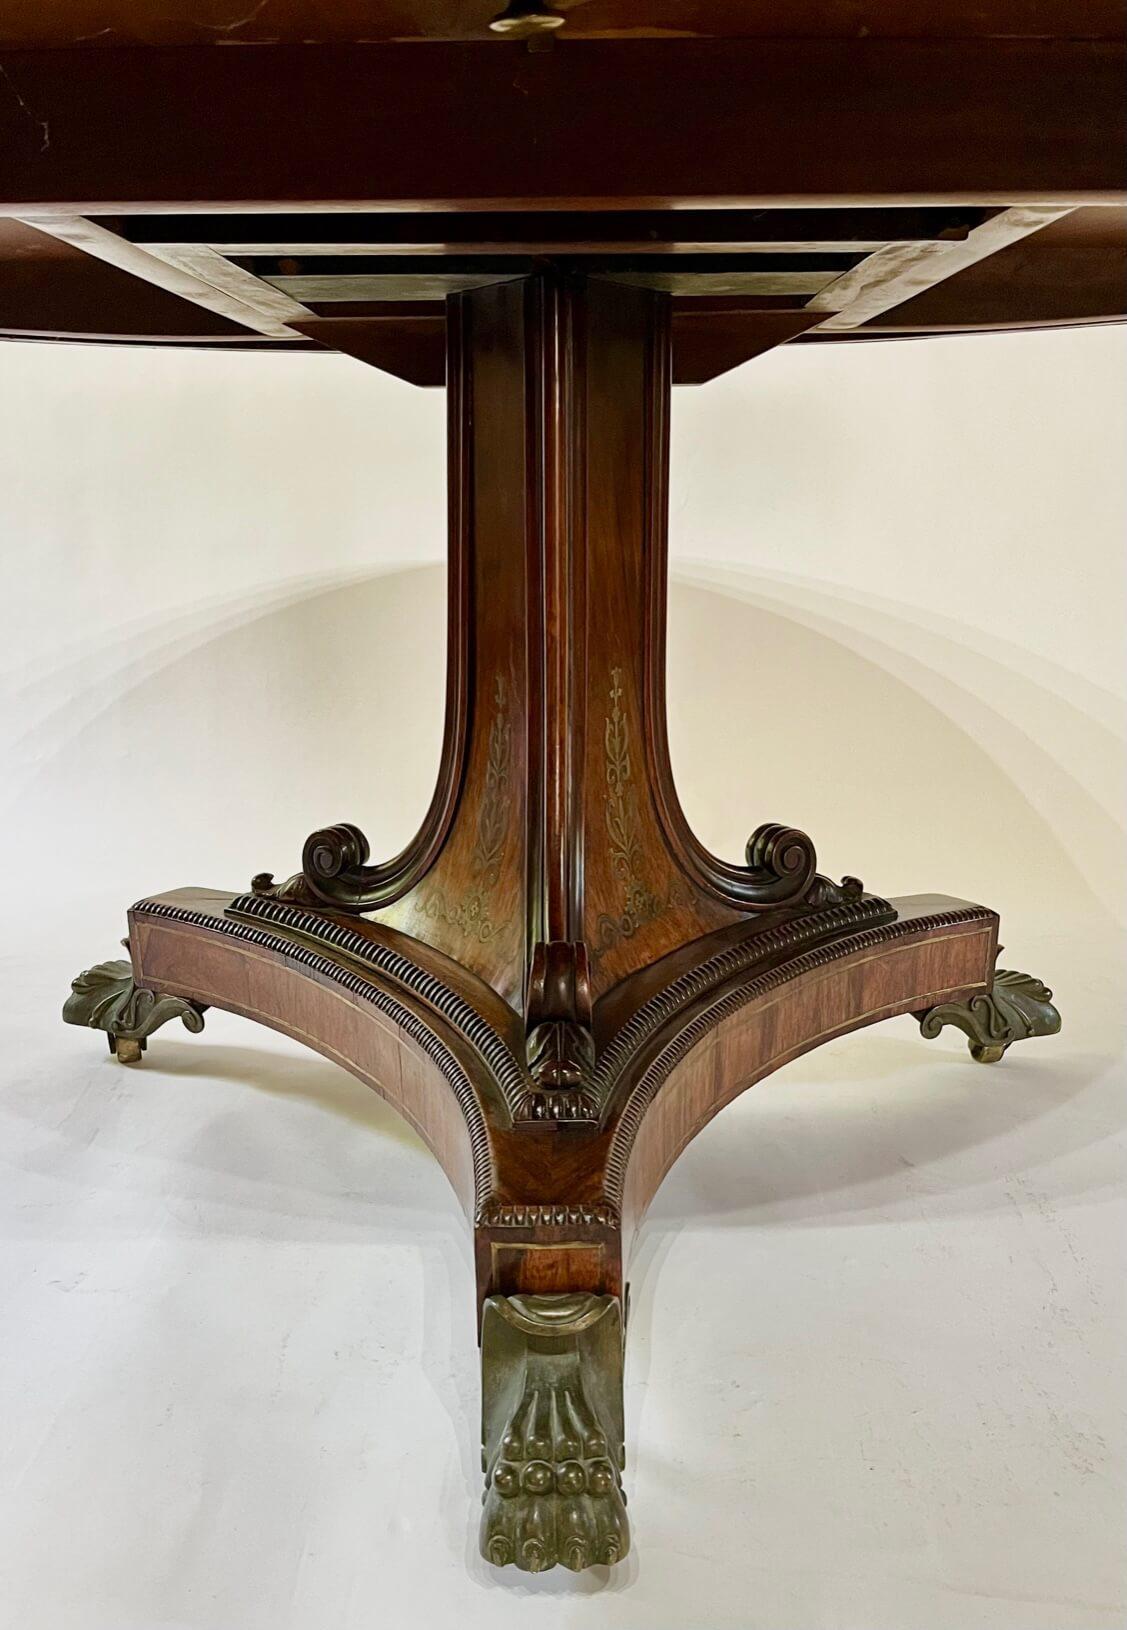 19th Century English Regency Brass Inlaid Rosewood Tilt-Top Center Table, circa 1820 For Sale